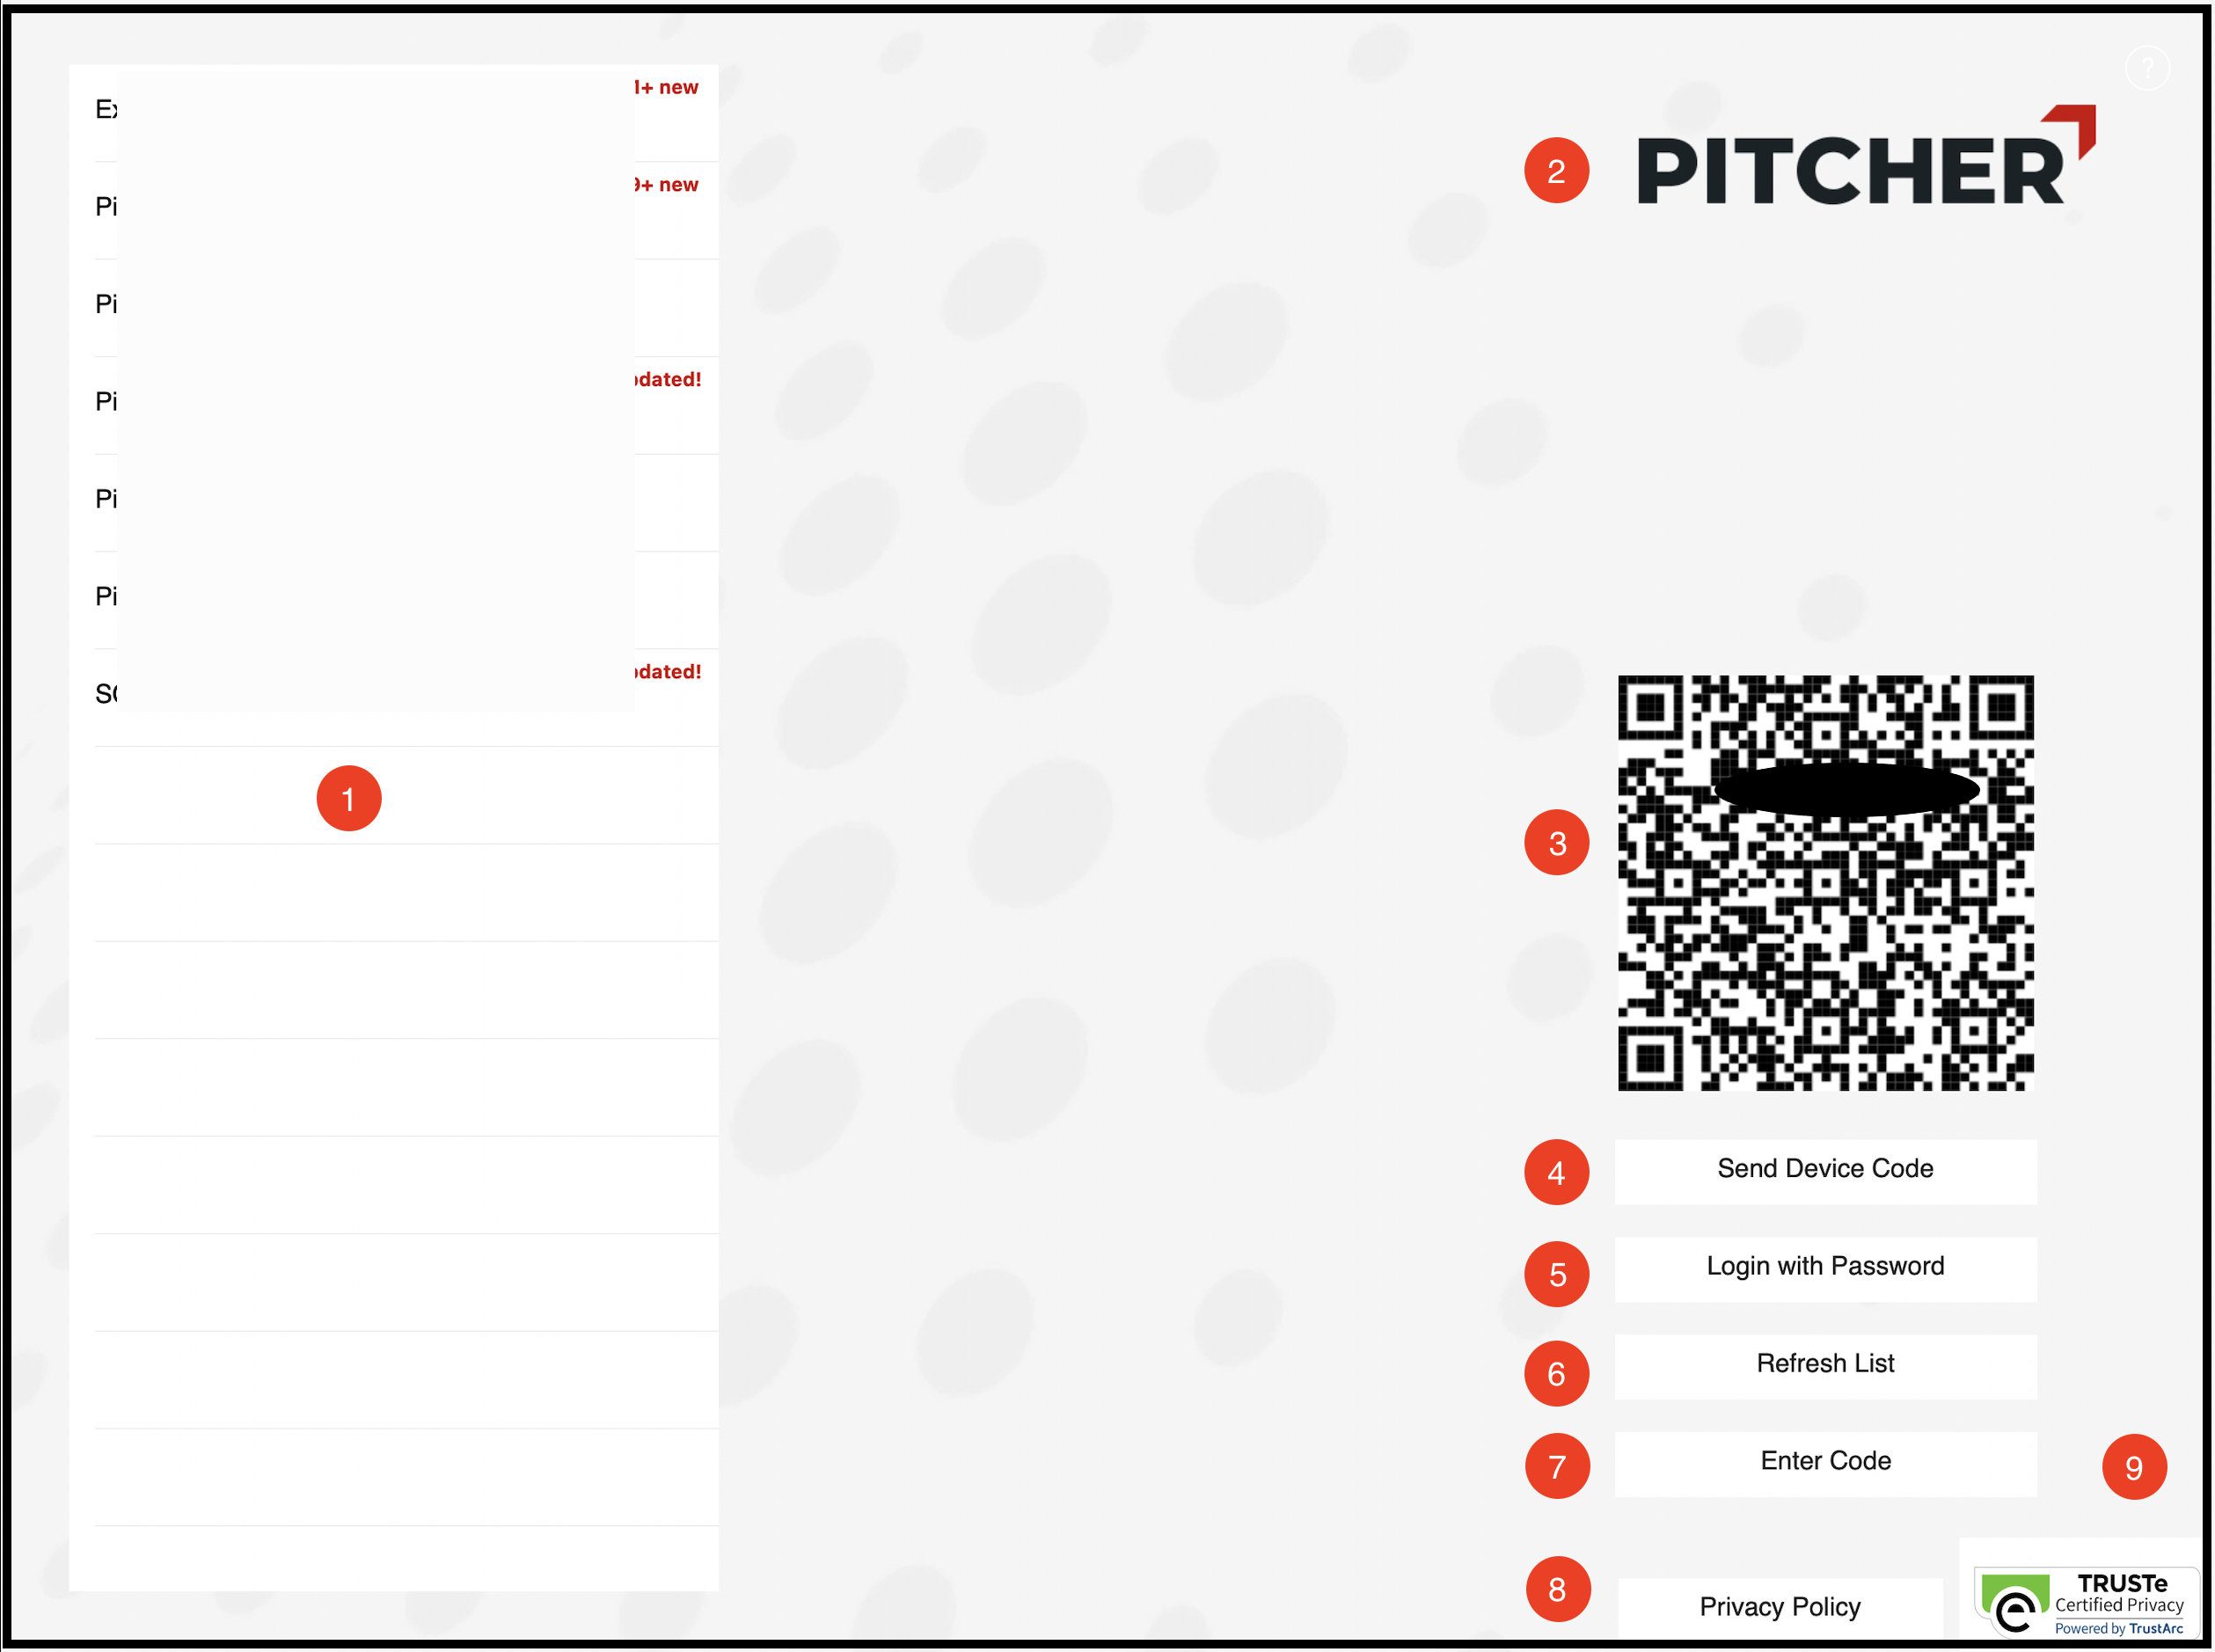 Initial Launch Screen of the Pitcher Impact App on iPad